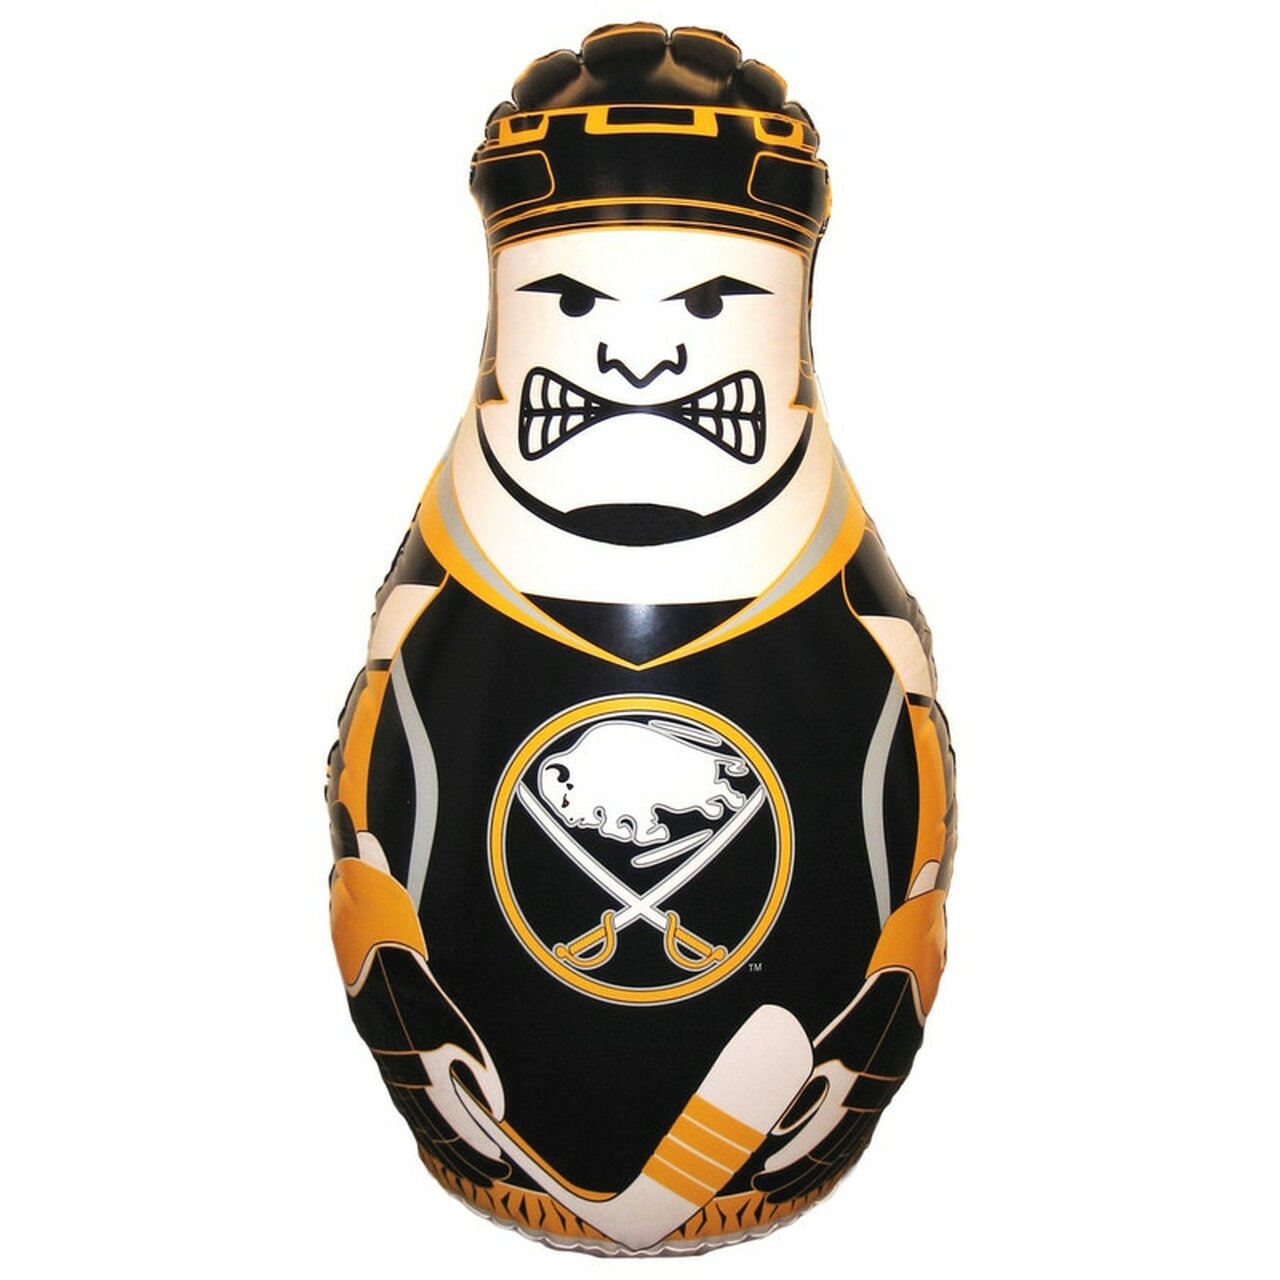 Kids inflatable toy punching bag with Buffalo Sabres hockey player graphics